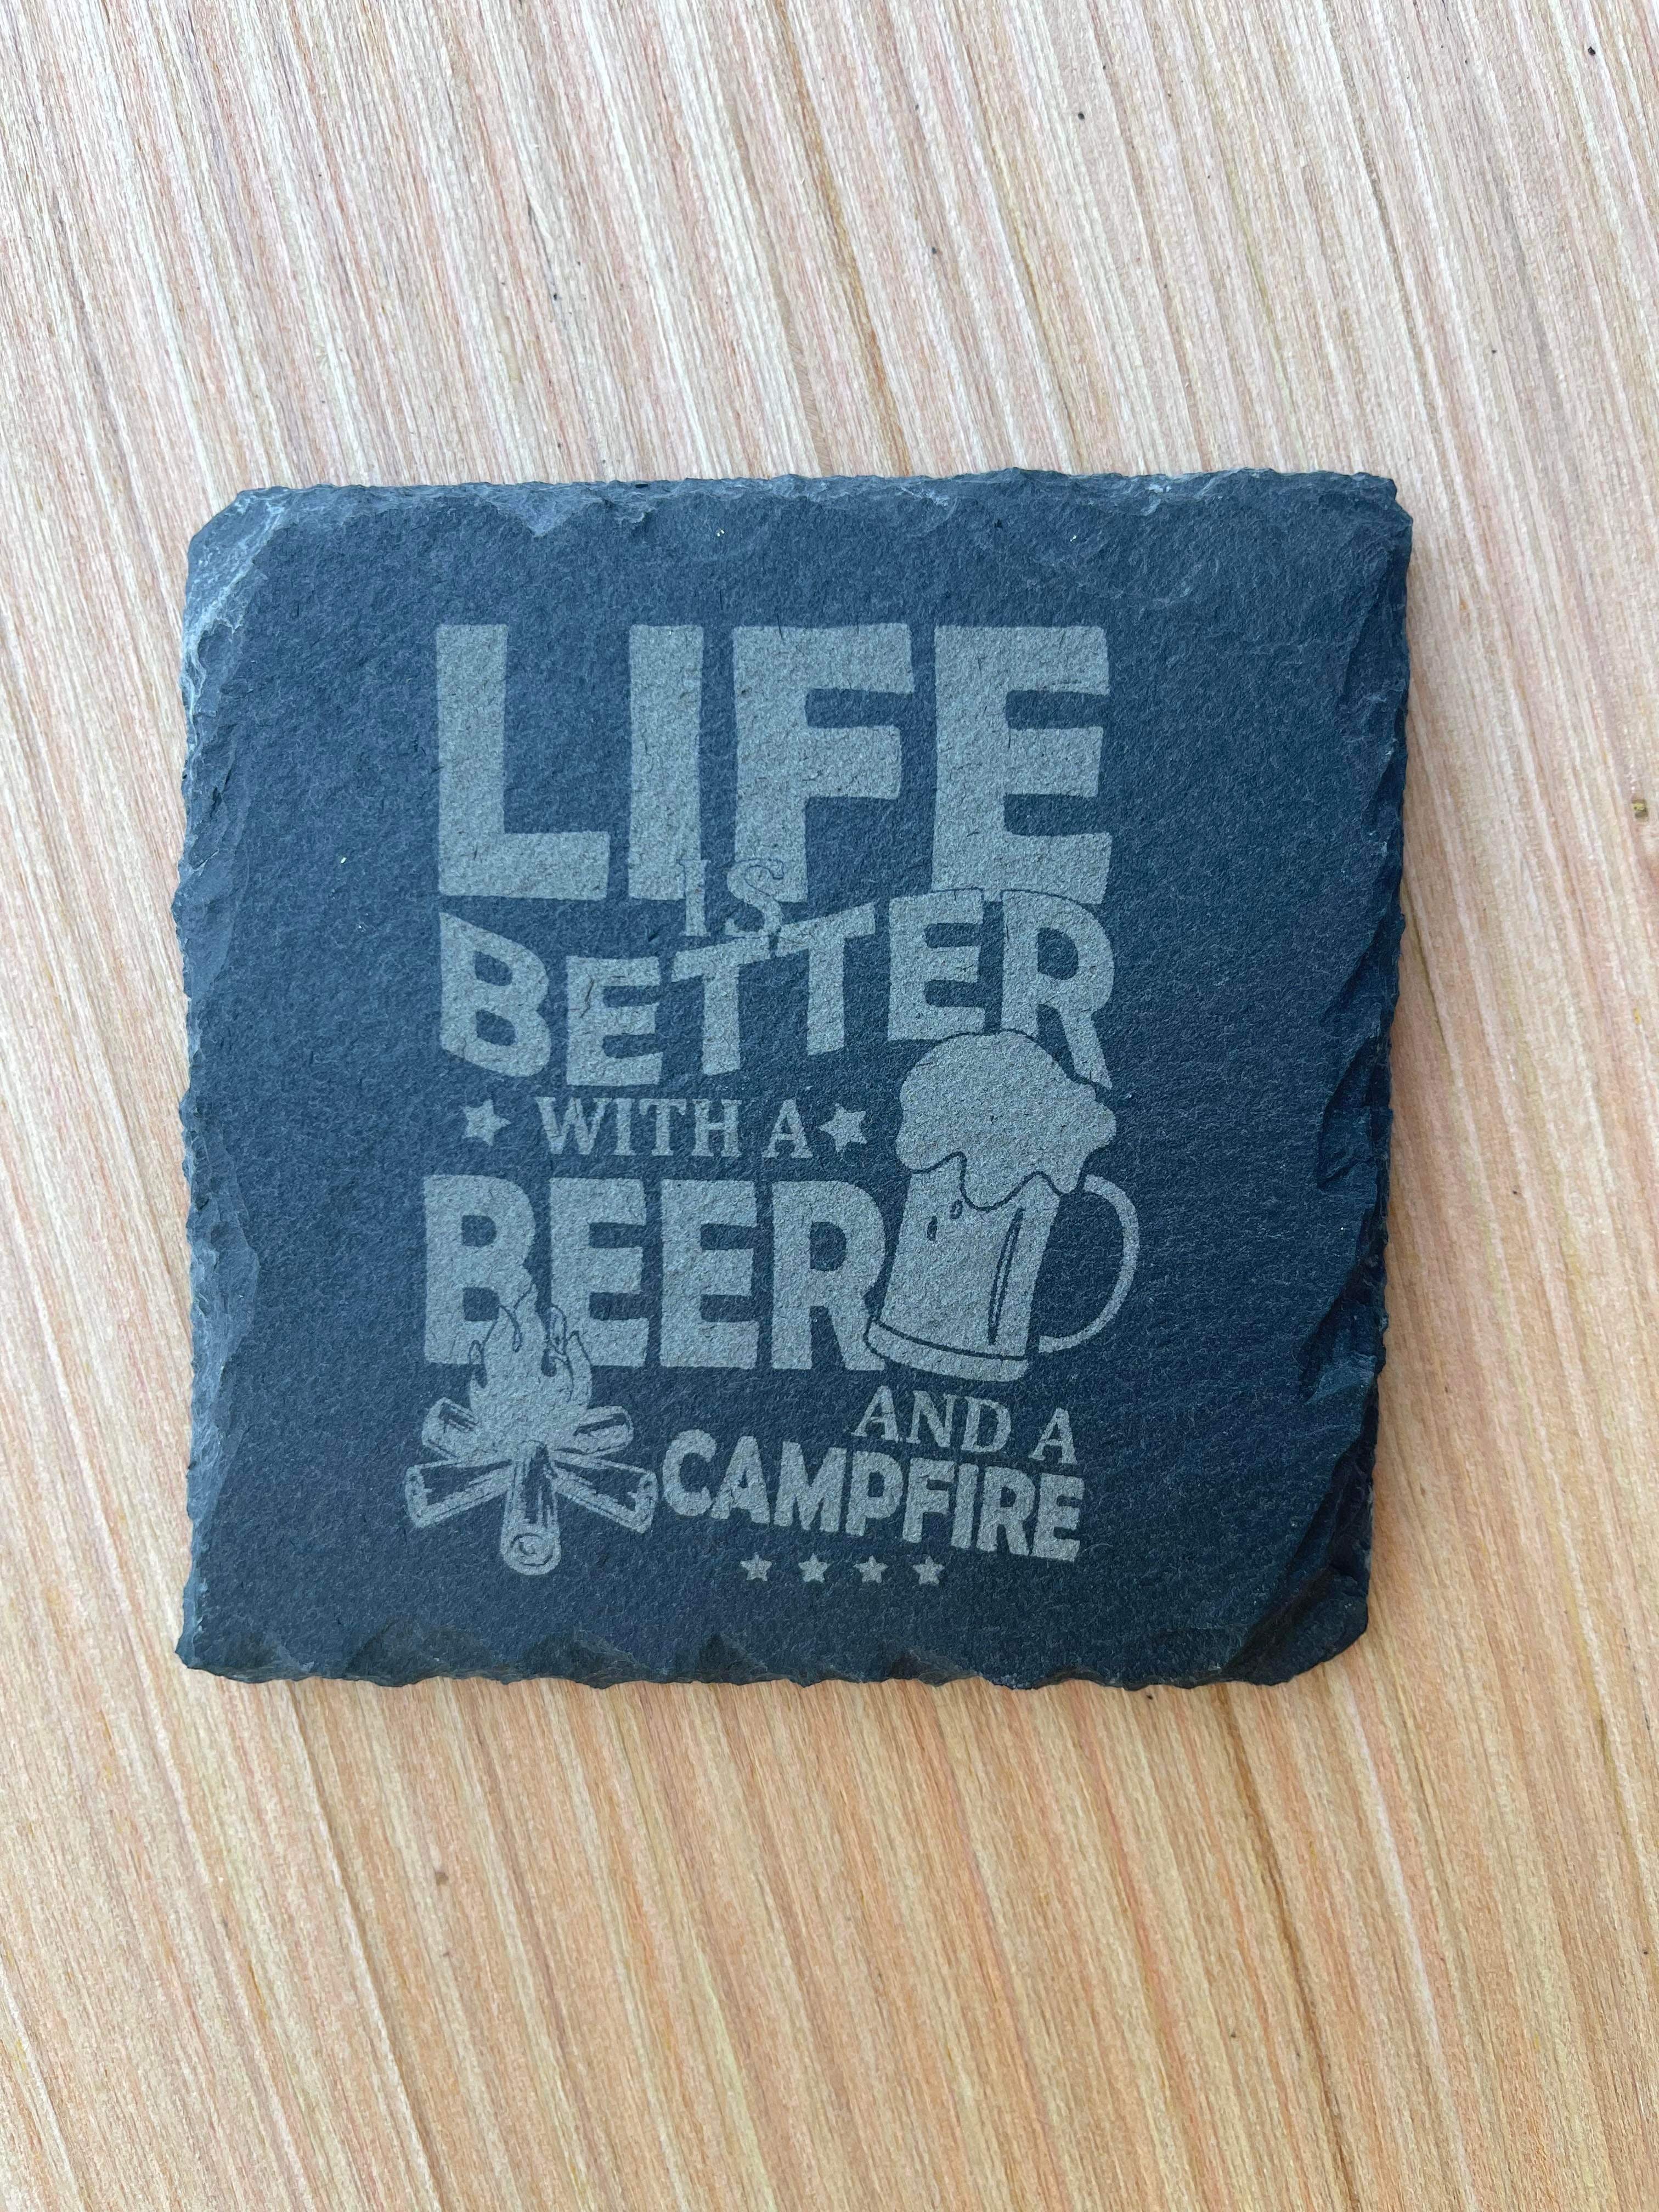 Life is Better With Beer Slate Coasters - Sets of 4